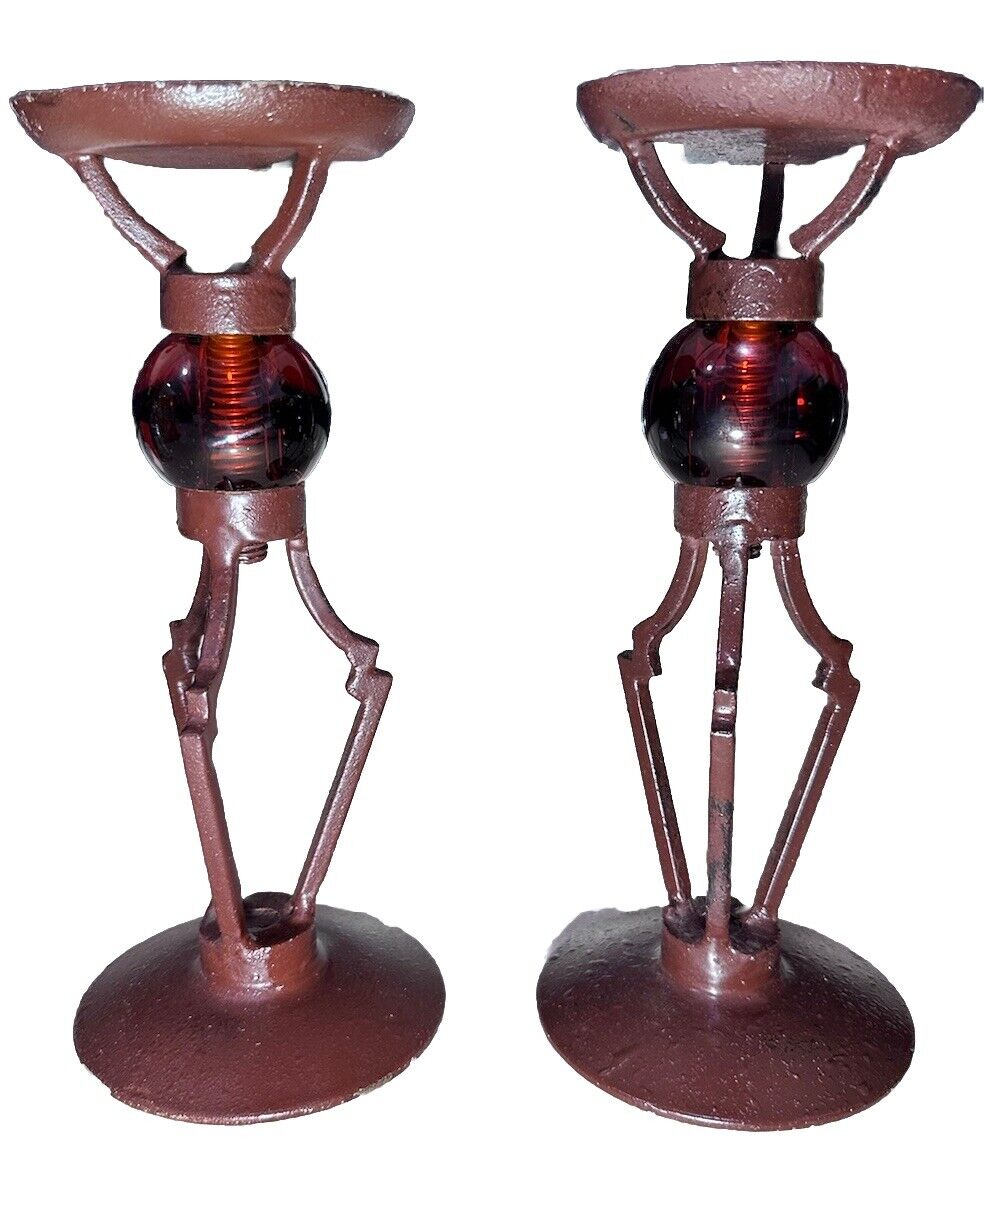 2 Brutalist Gothic Candle Holders Cast Iron With Amber Glass Ball Sphere Set-2